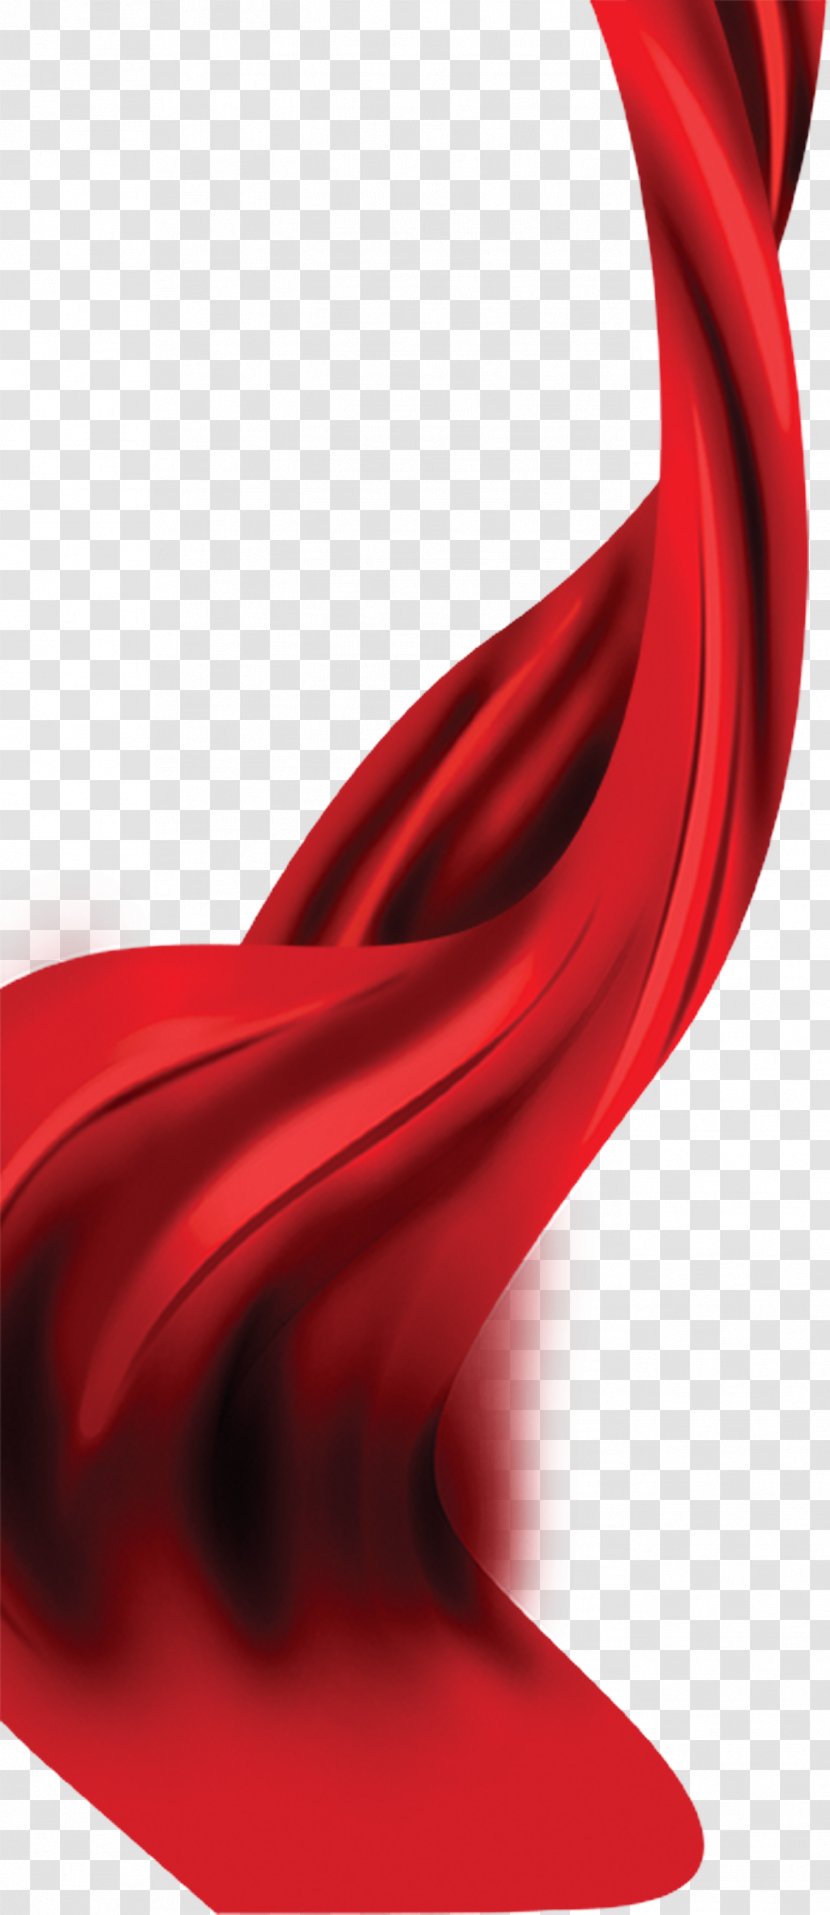 Red Satin - Picture Material Transparent PNG